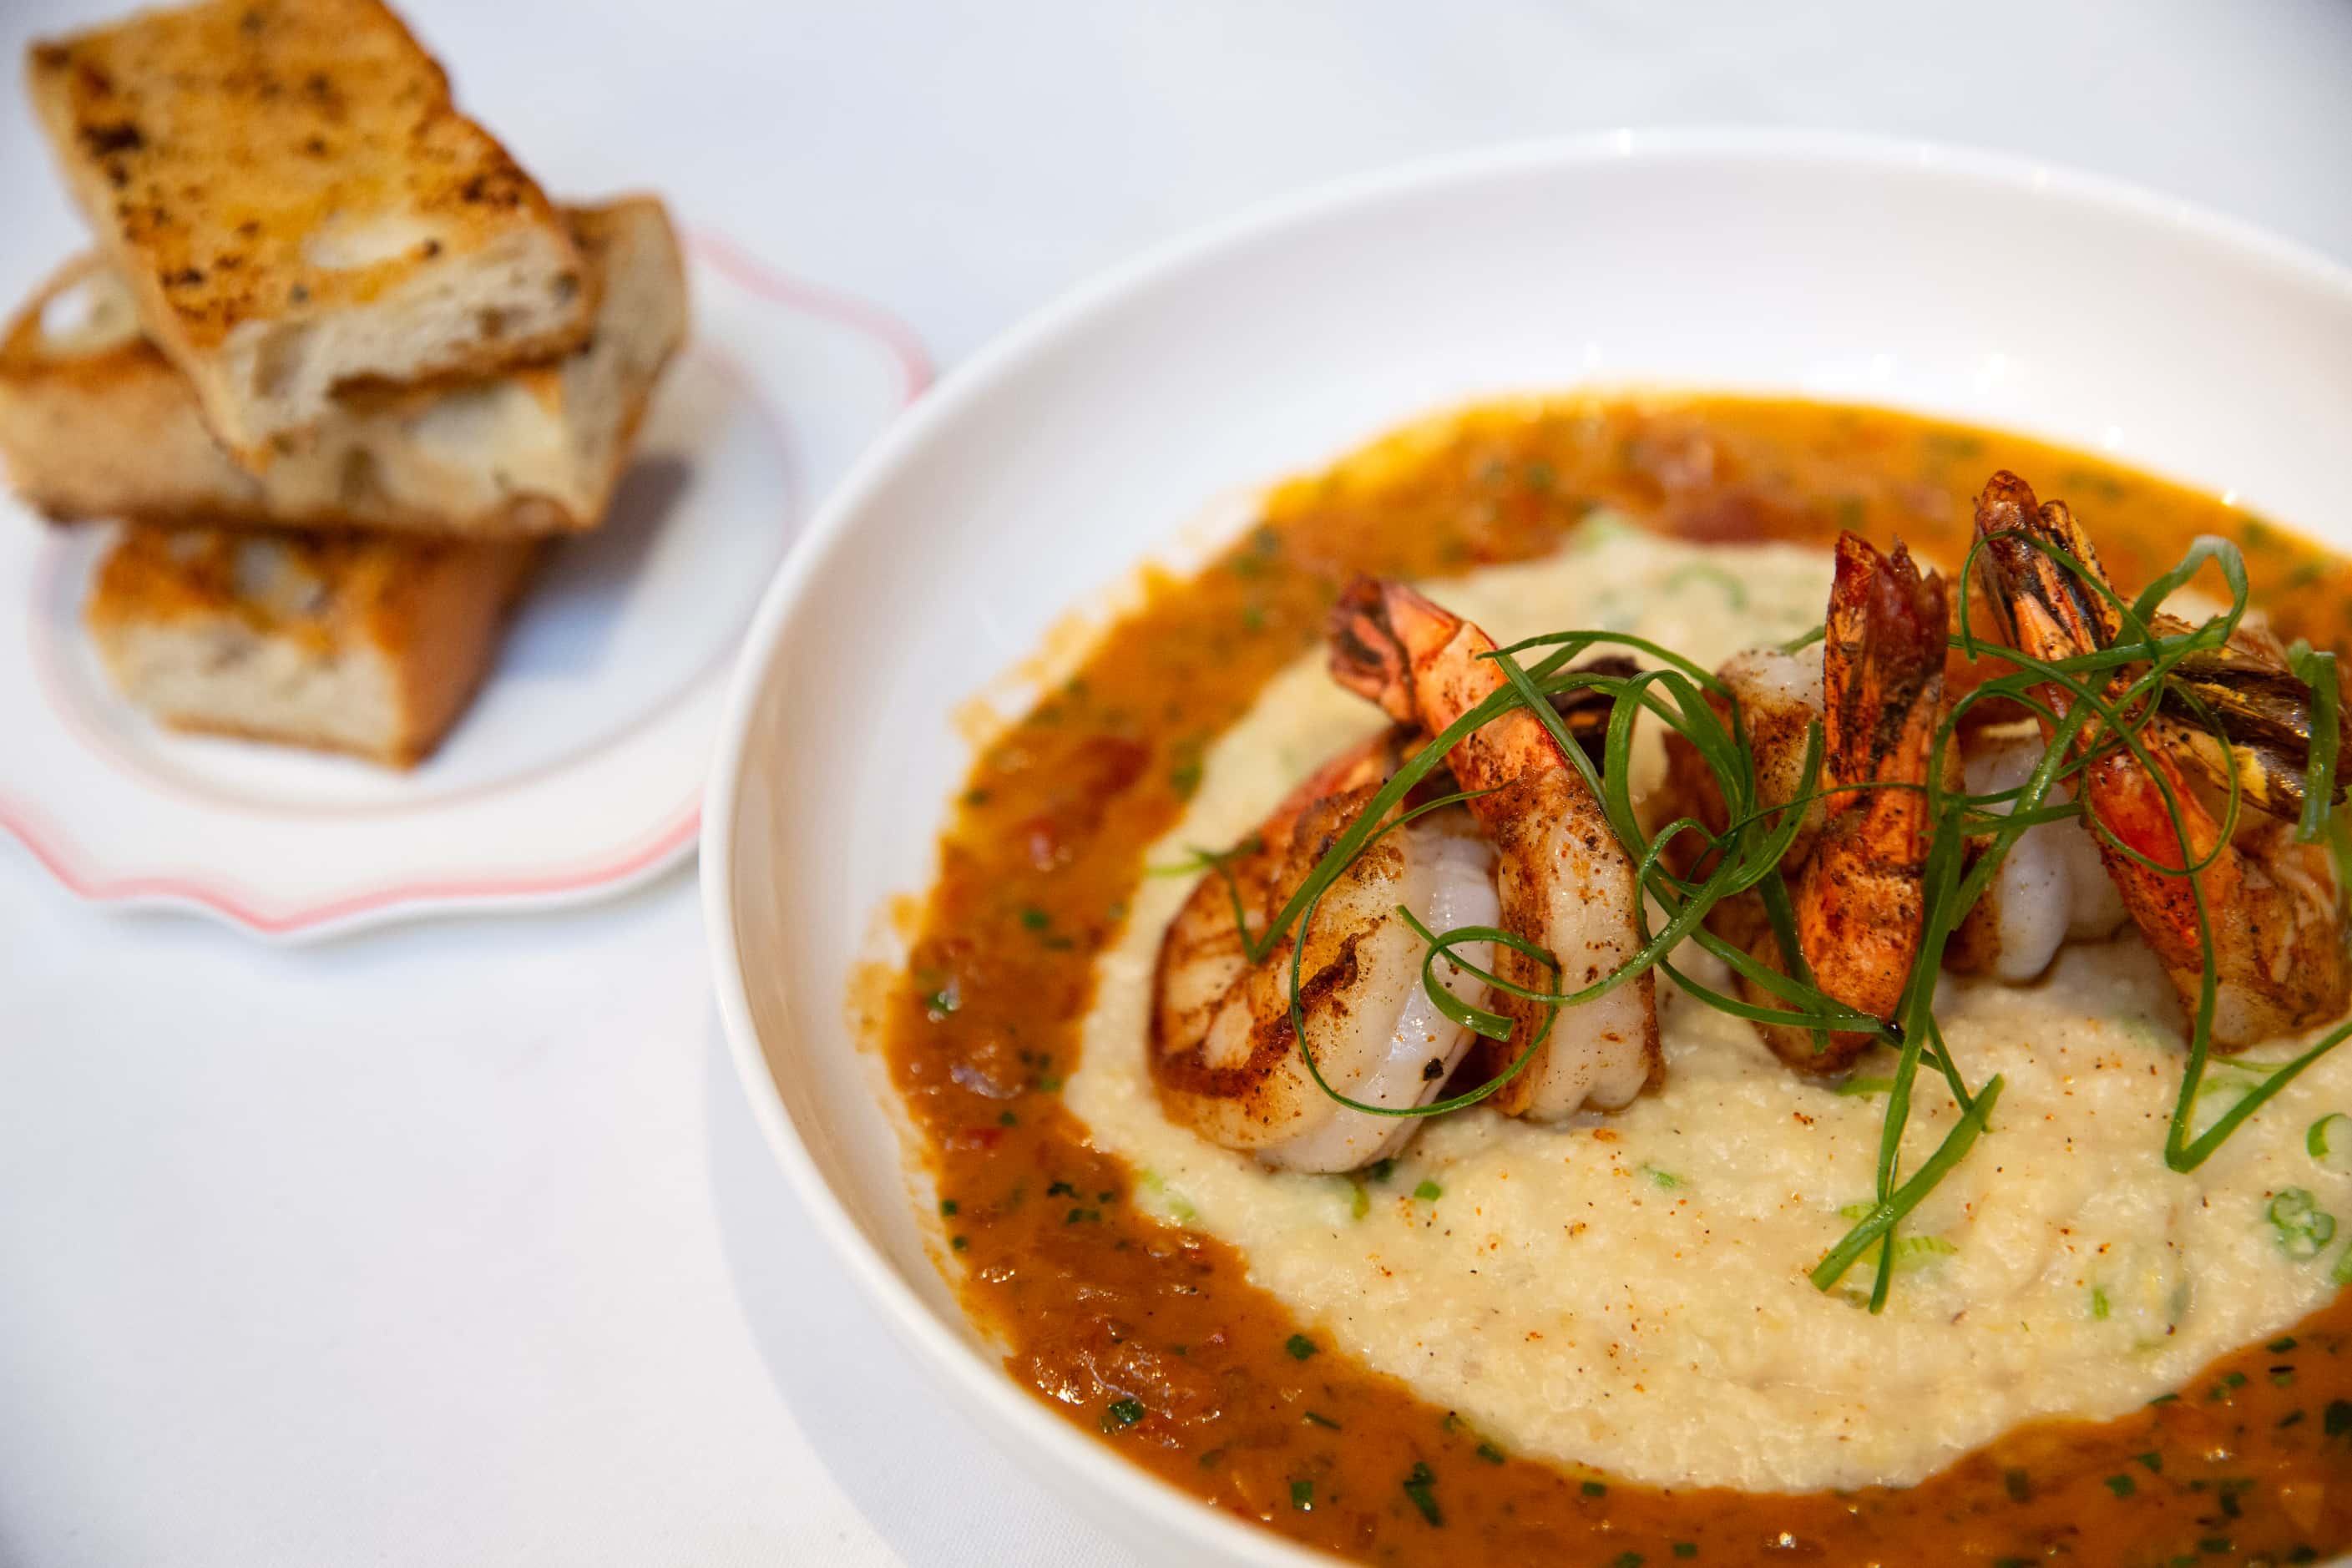 Barbeque shrimp with white cheddar grits is a Louisiana-inspired dish at French bistro...